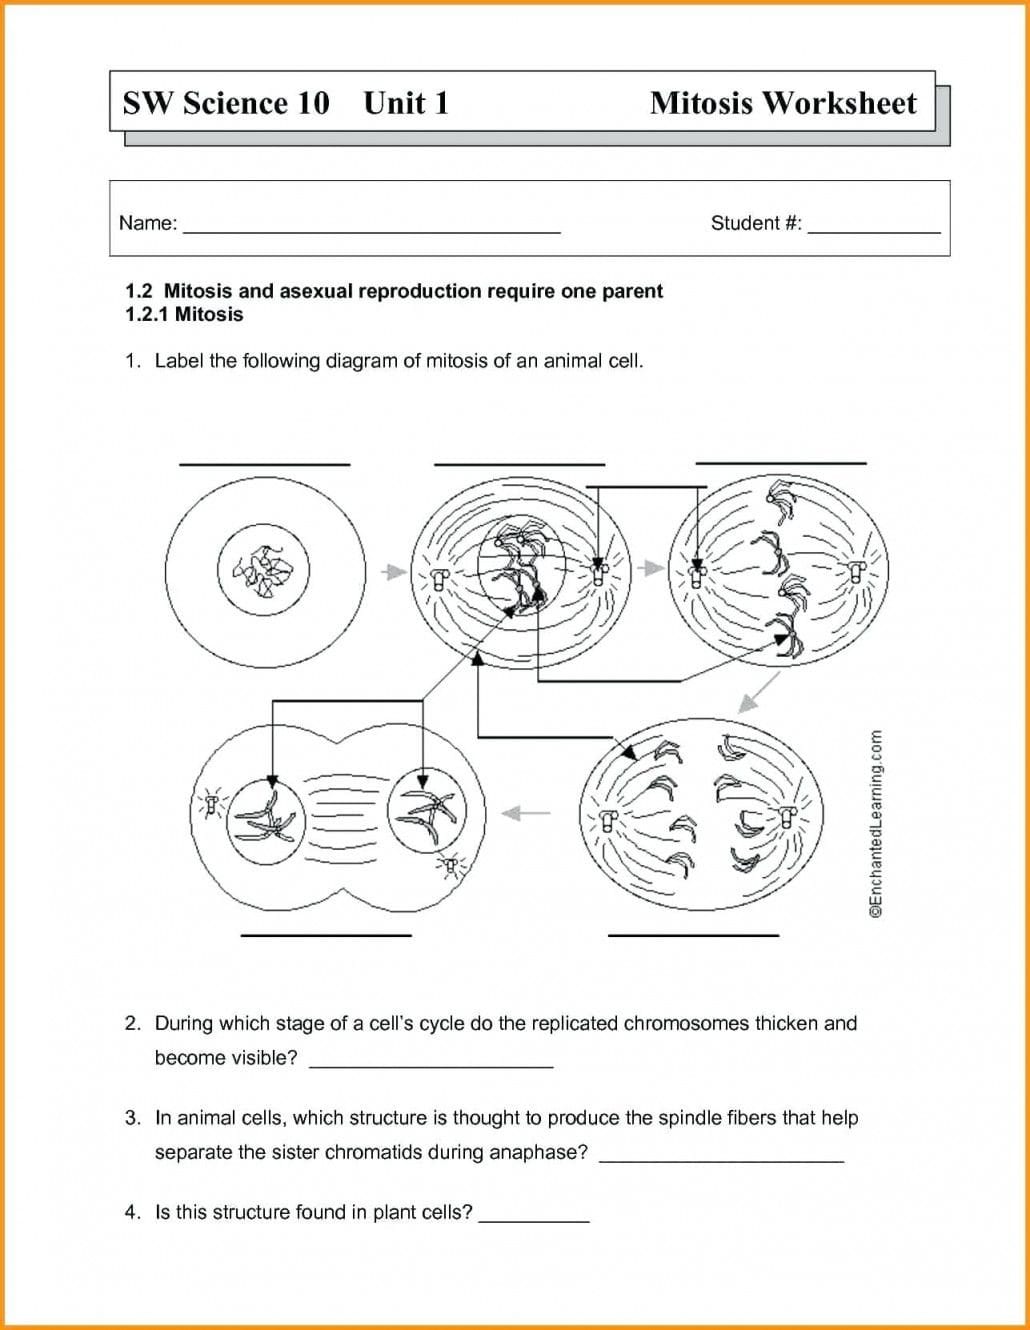 Worksheet 39 Mitosis Sequencing Answers  Lobo Black With Regard To Worksheet 3 9 Mitosis Sequencing Answers